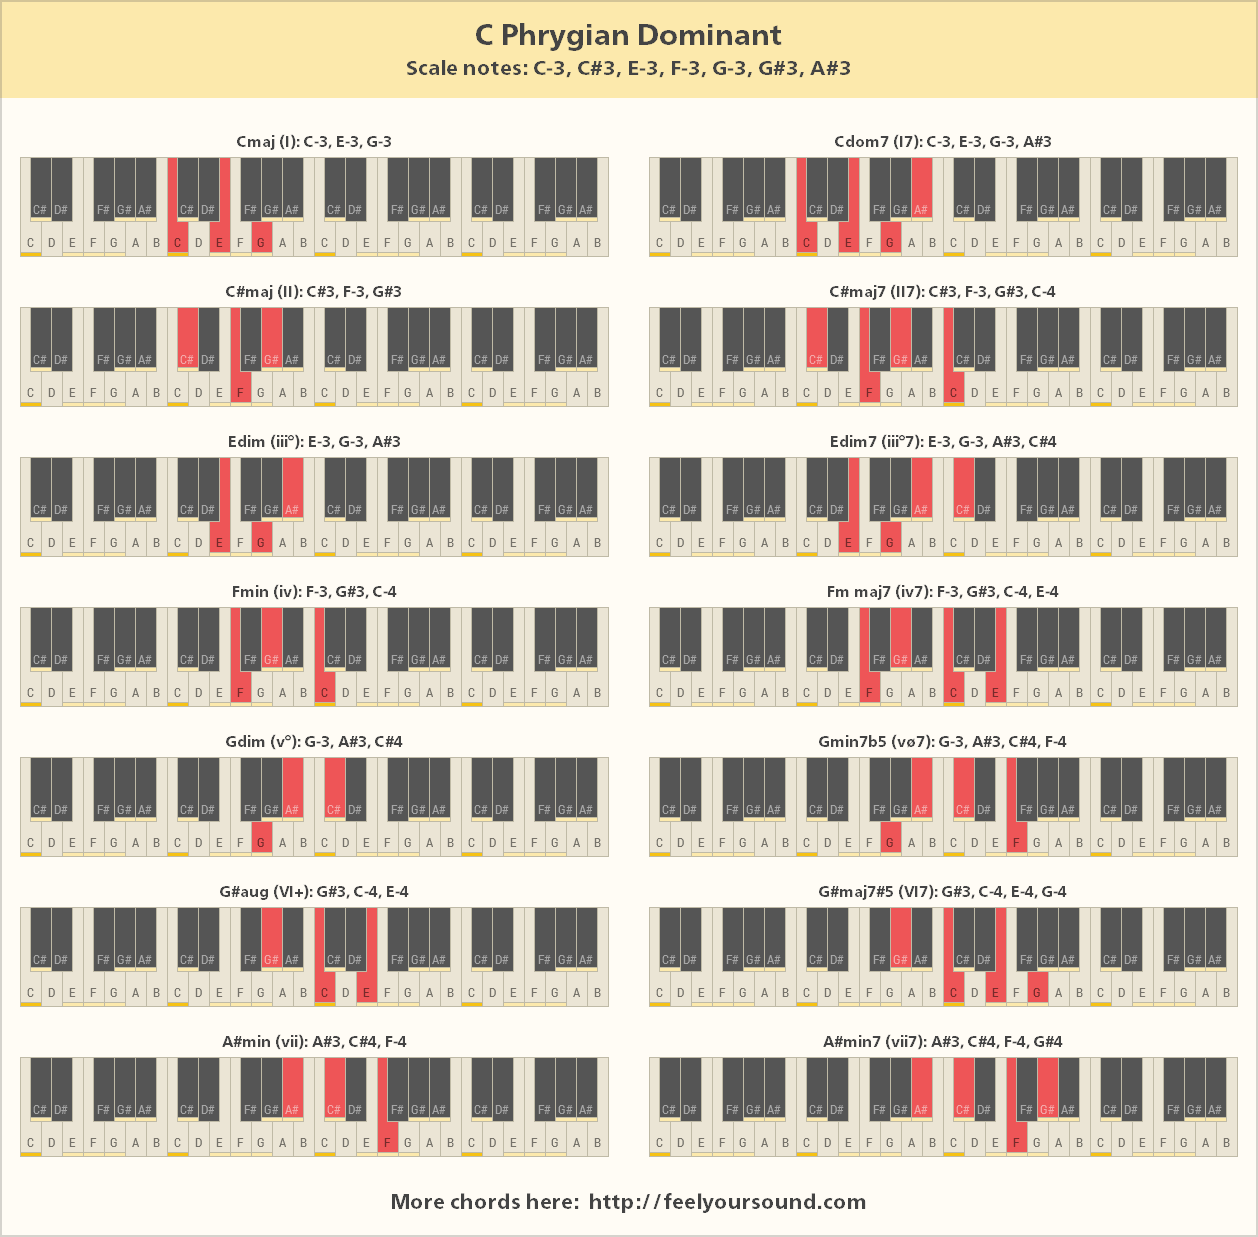 All important chords of C Phrygian Dominant